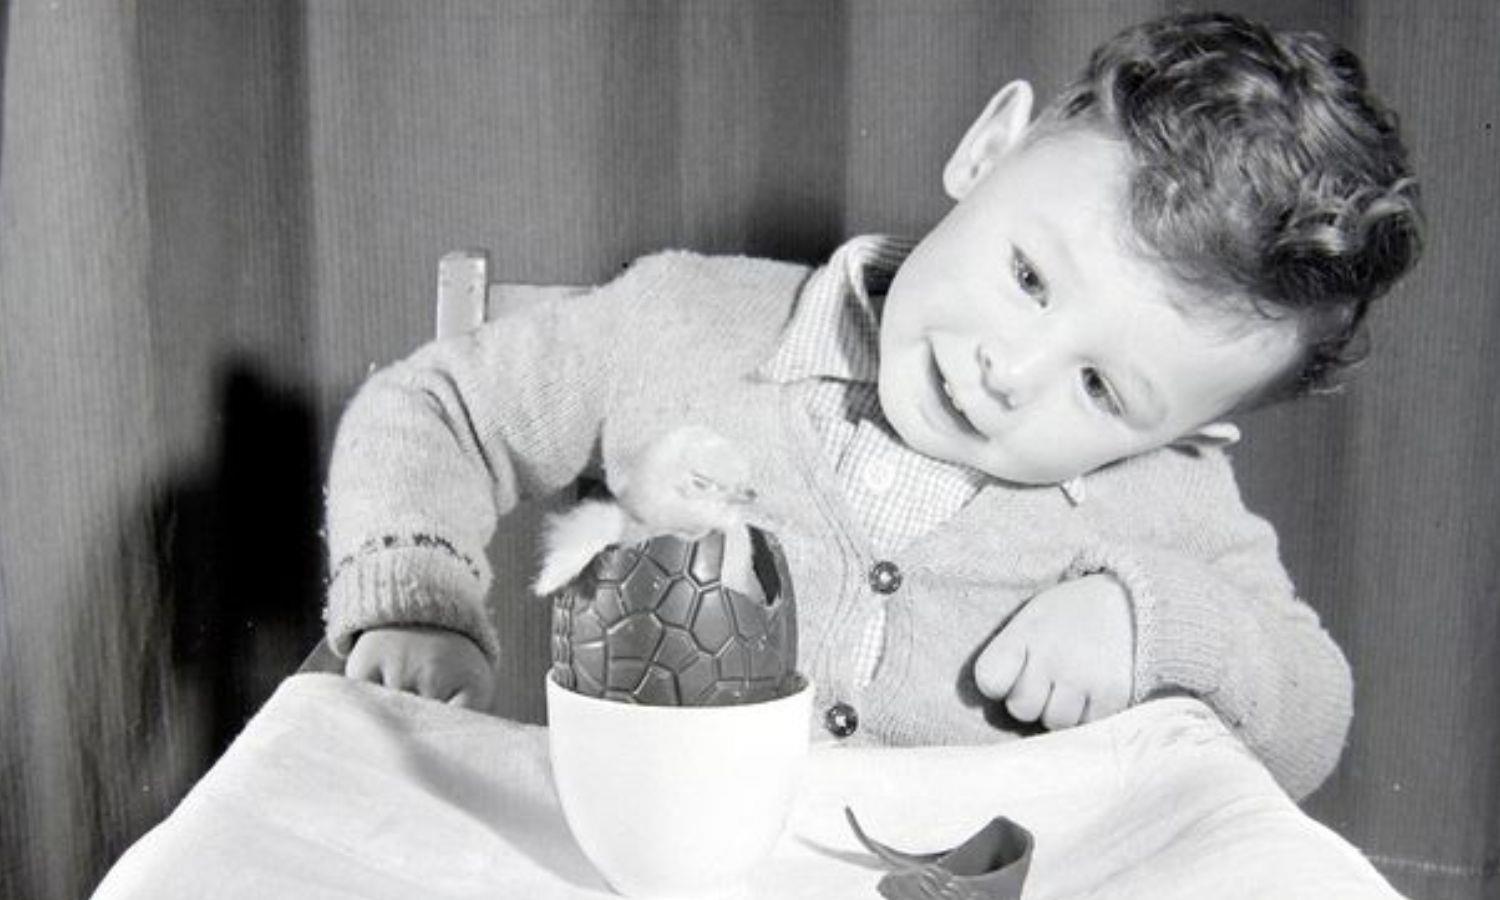 Child looking at live chick in a chocolate egg